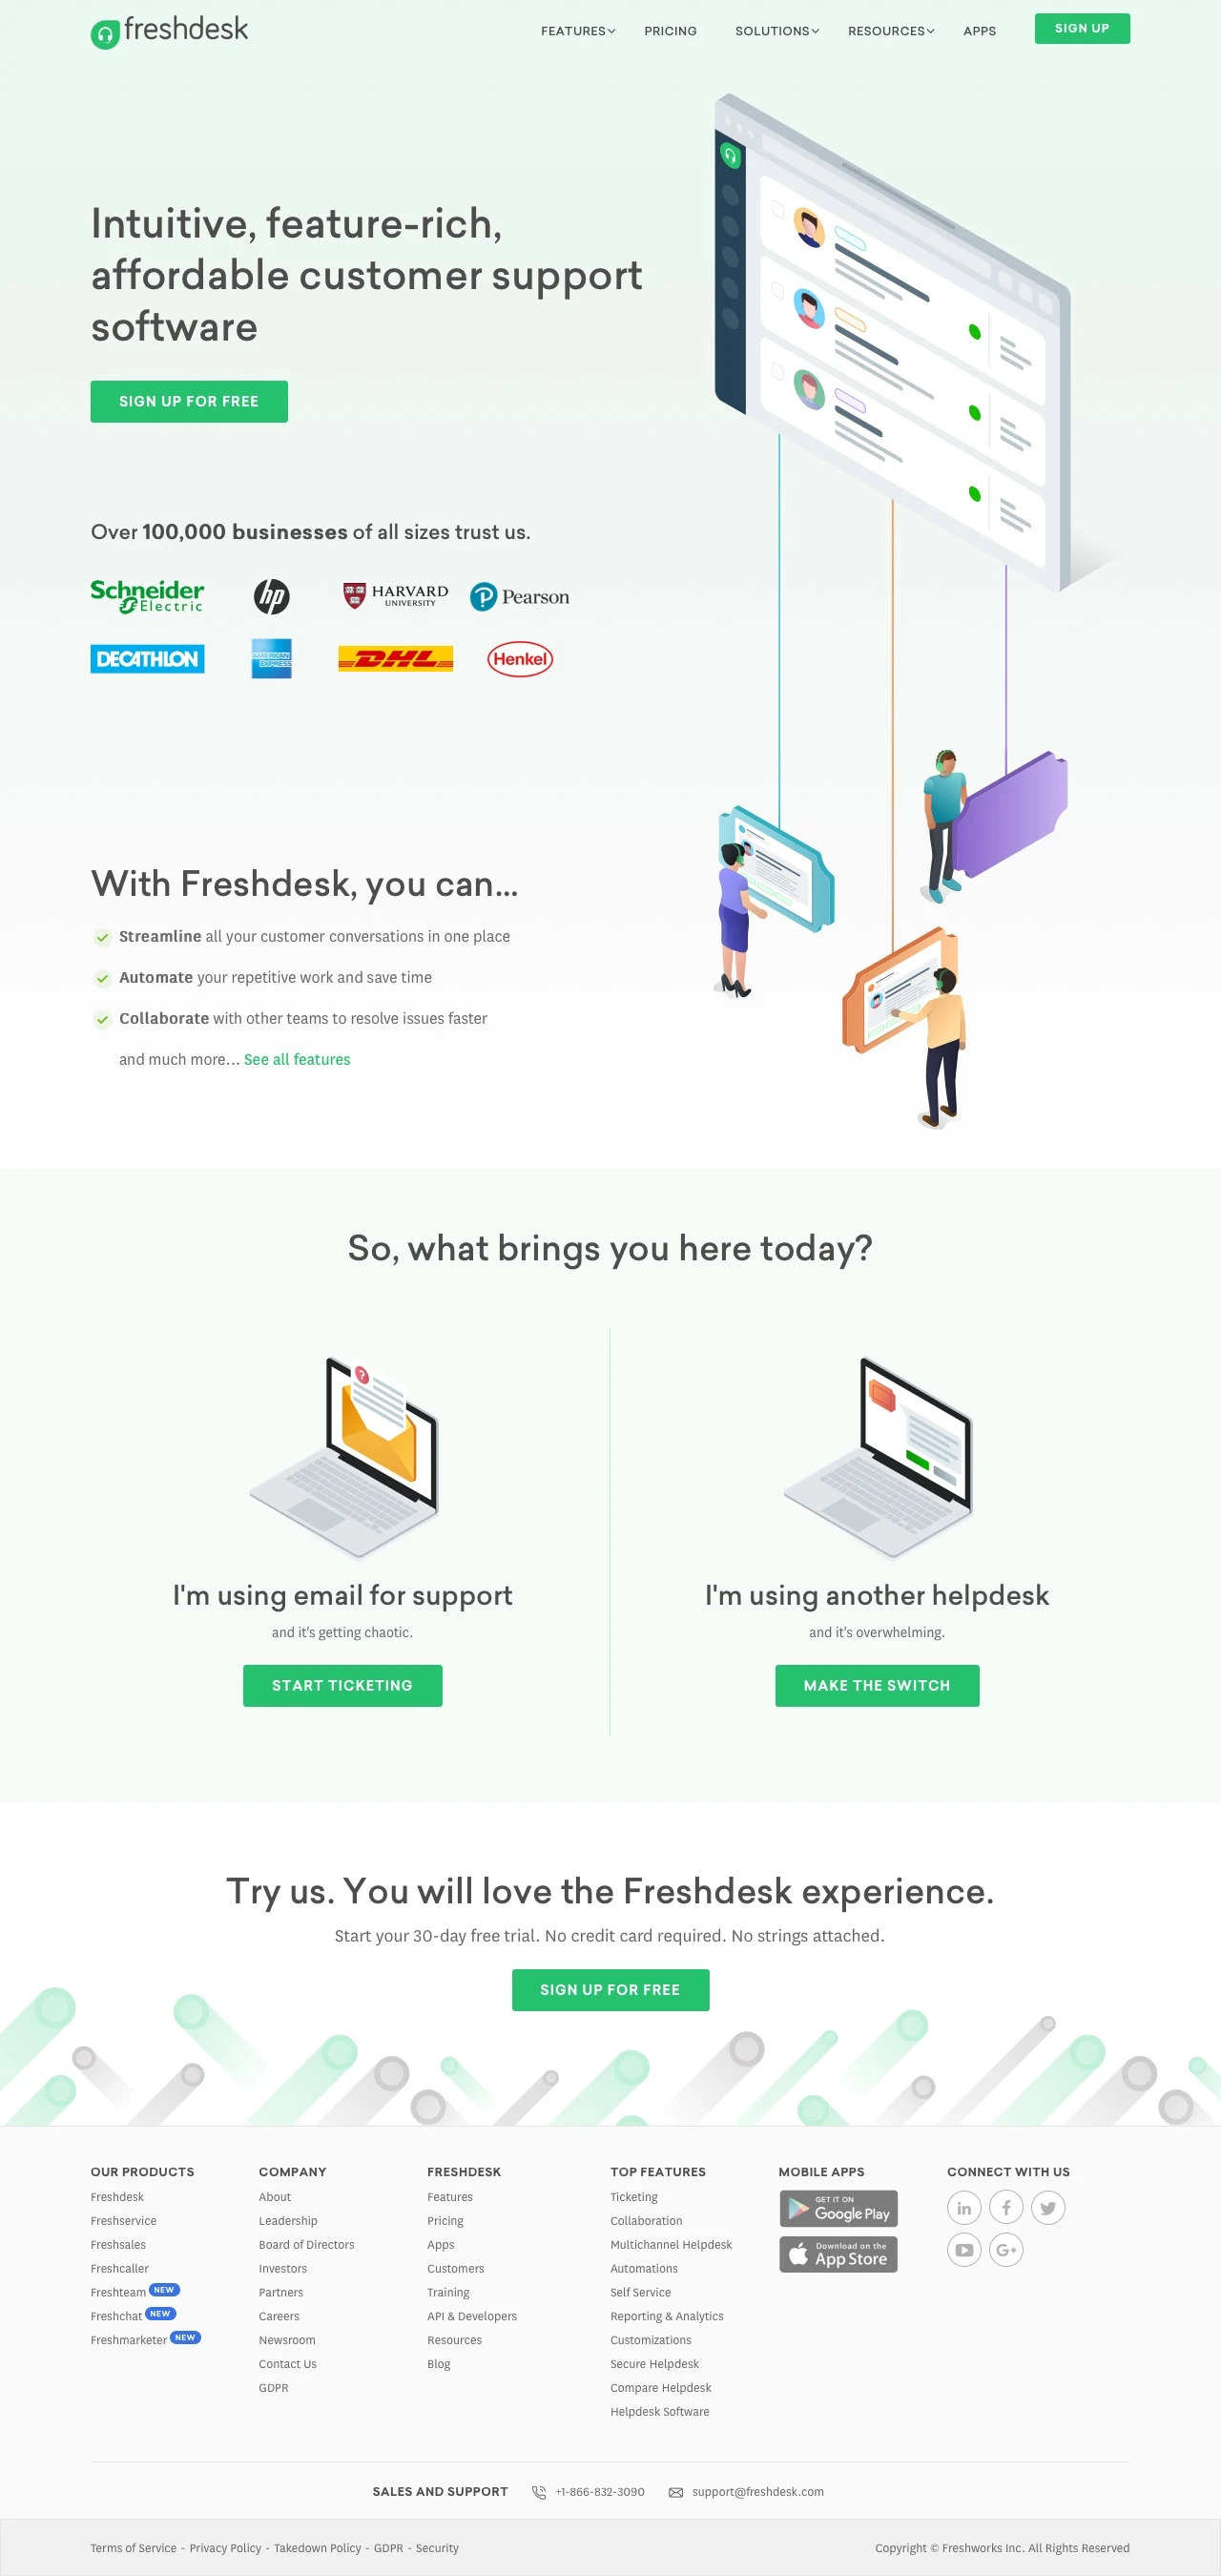 Freshdesk Landing Page Example: Intuitive, feature-rich, affordable customer support software